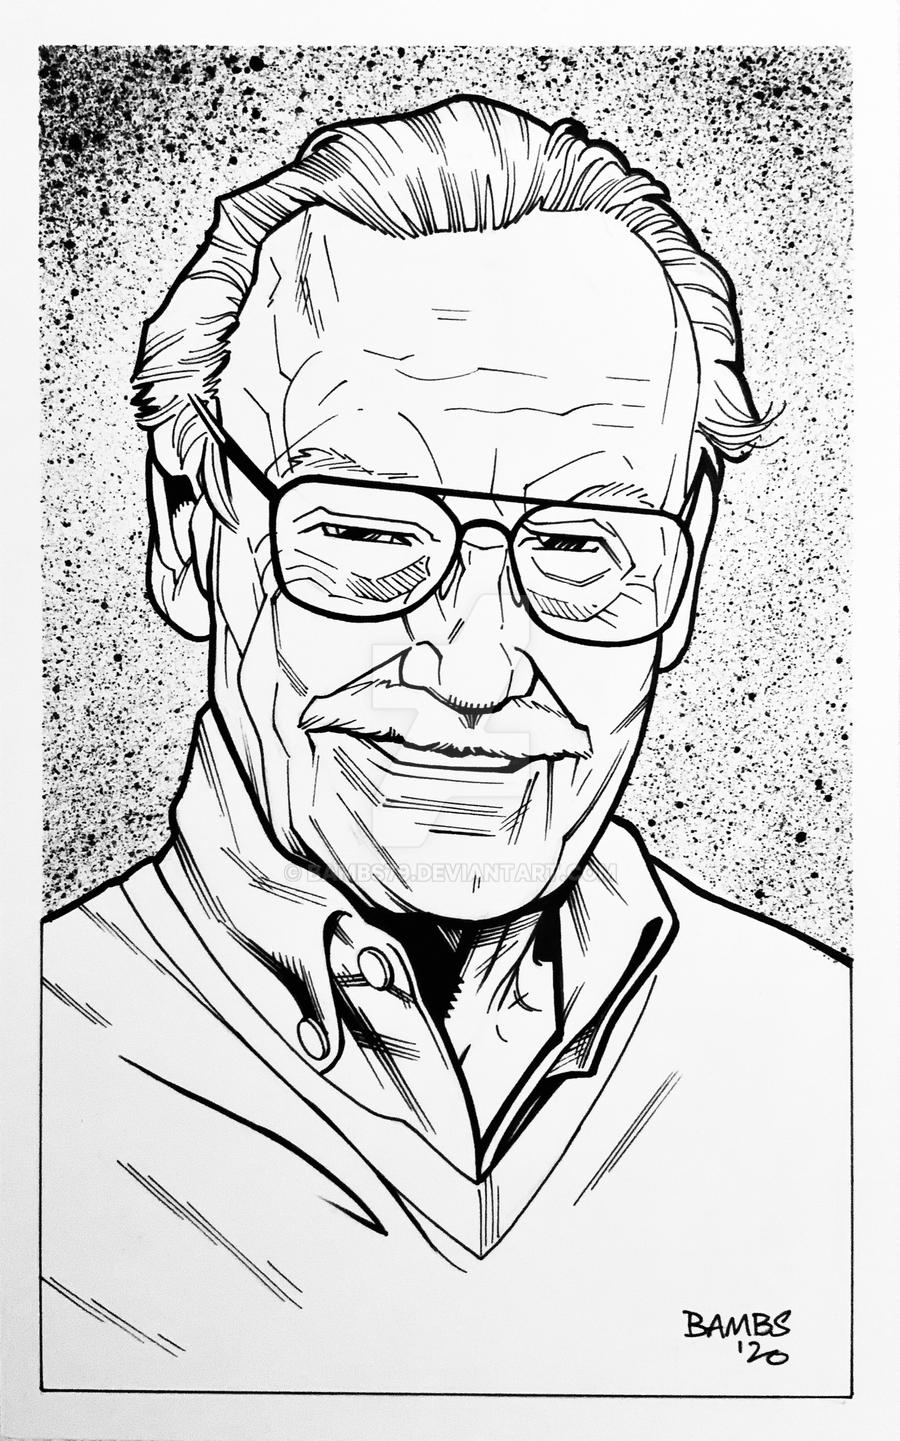 Convention Style Sketch - Stan Lee by Bambs79 on DeviantArt